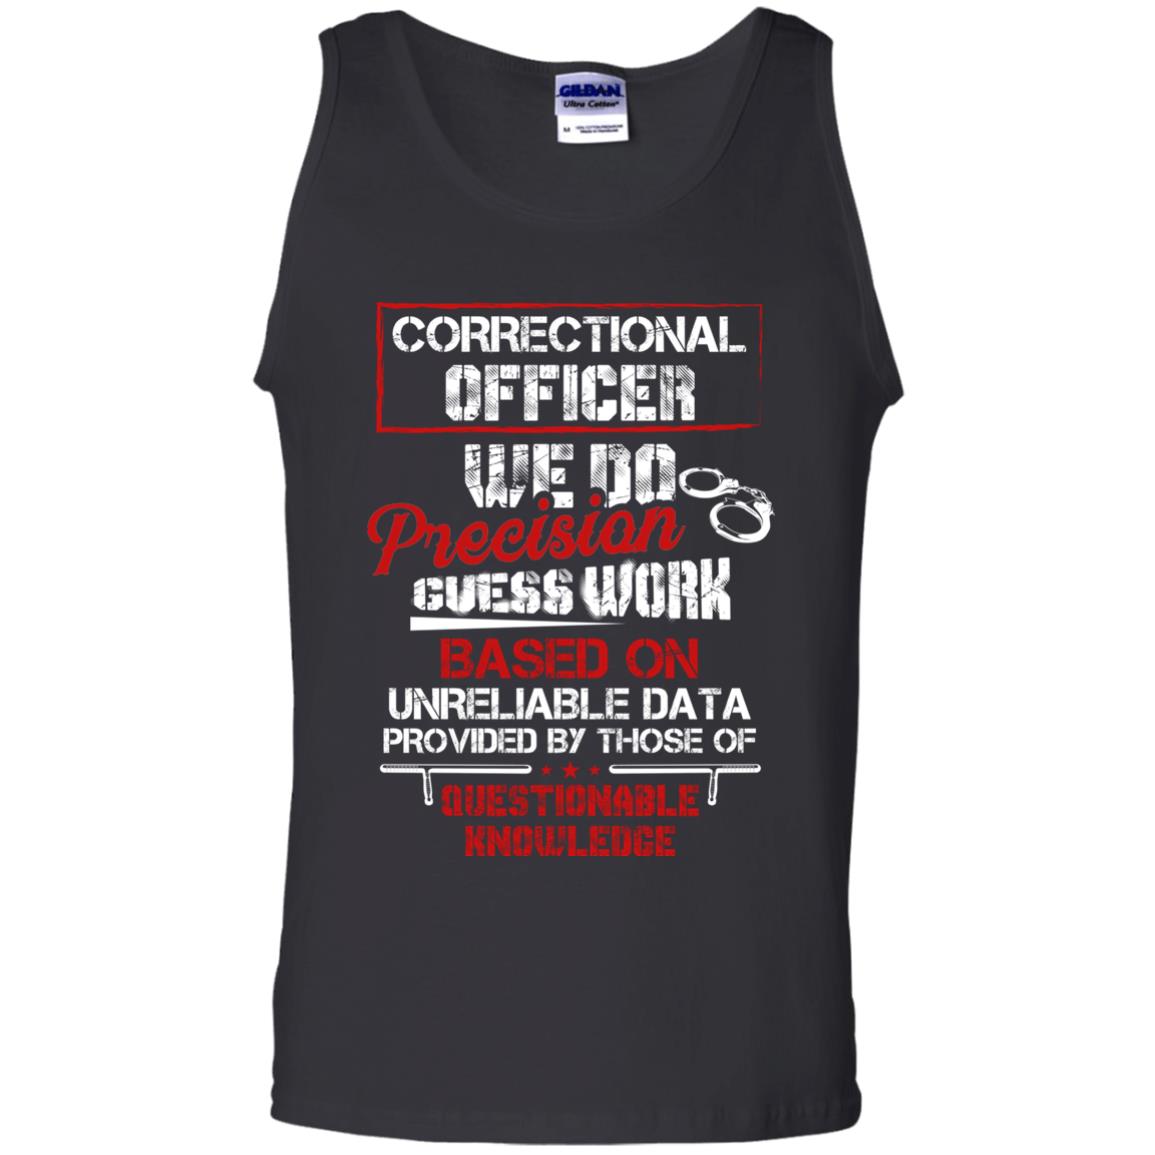 Correctional Officer We Do Precision Guess Work Based On Unreliable Data Provided By Those Of Questionable KnowledgeG220 Gildan 100% Cotton Tank Top